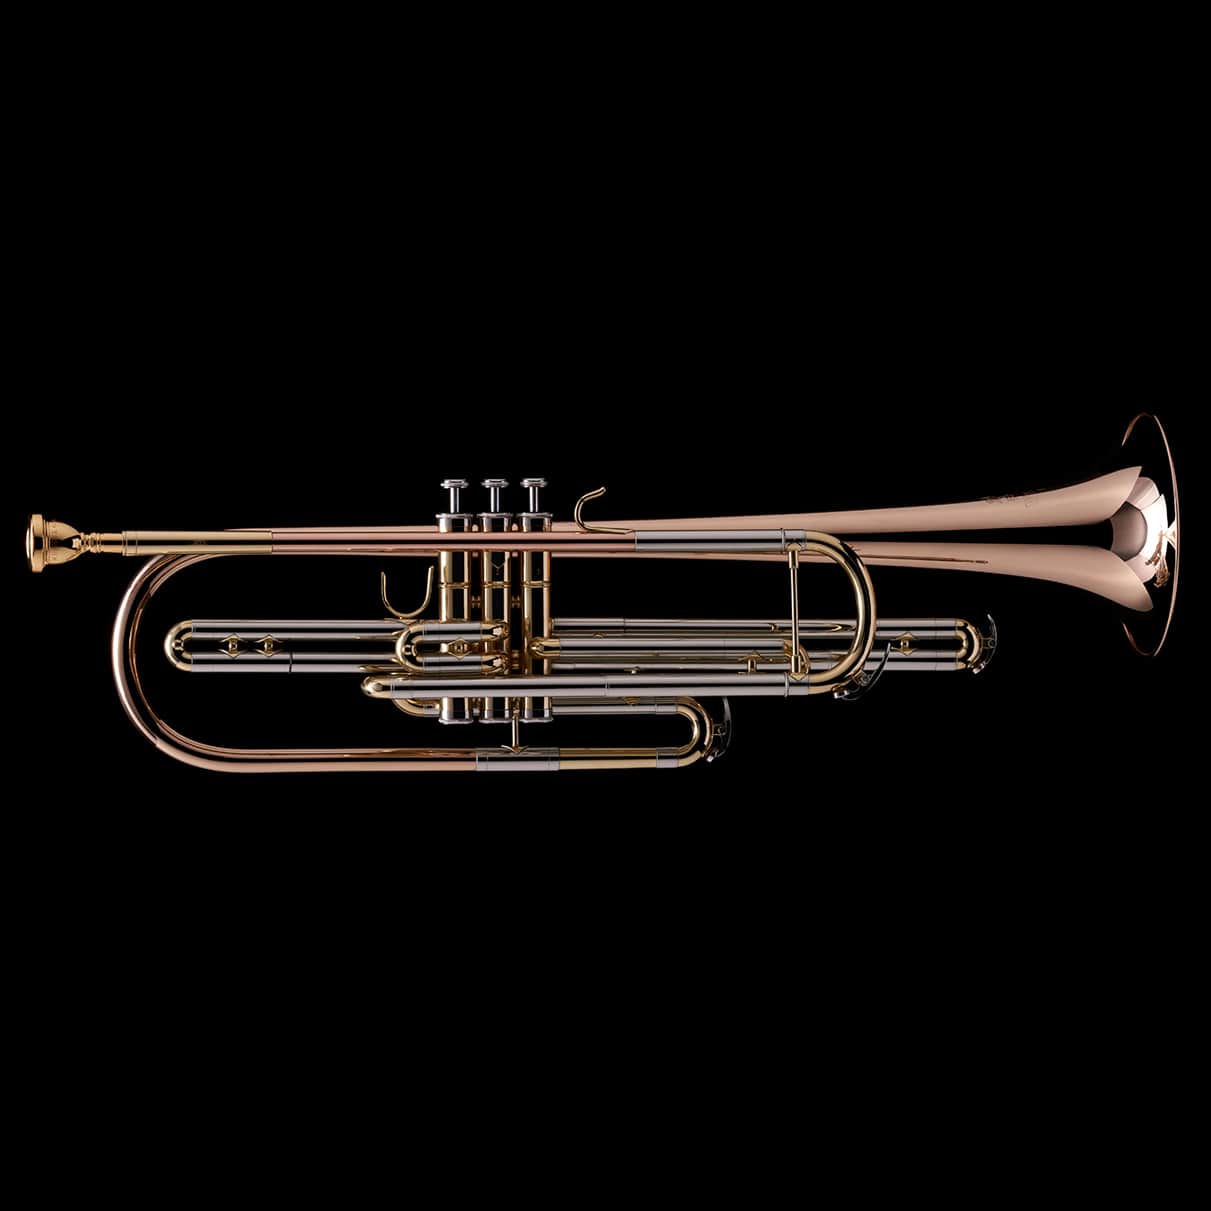 An image of a Bb Bass Trumpet (piston valve) from Wessex Tubas